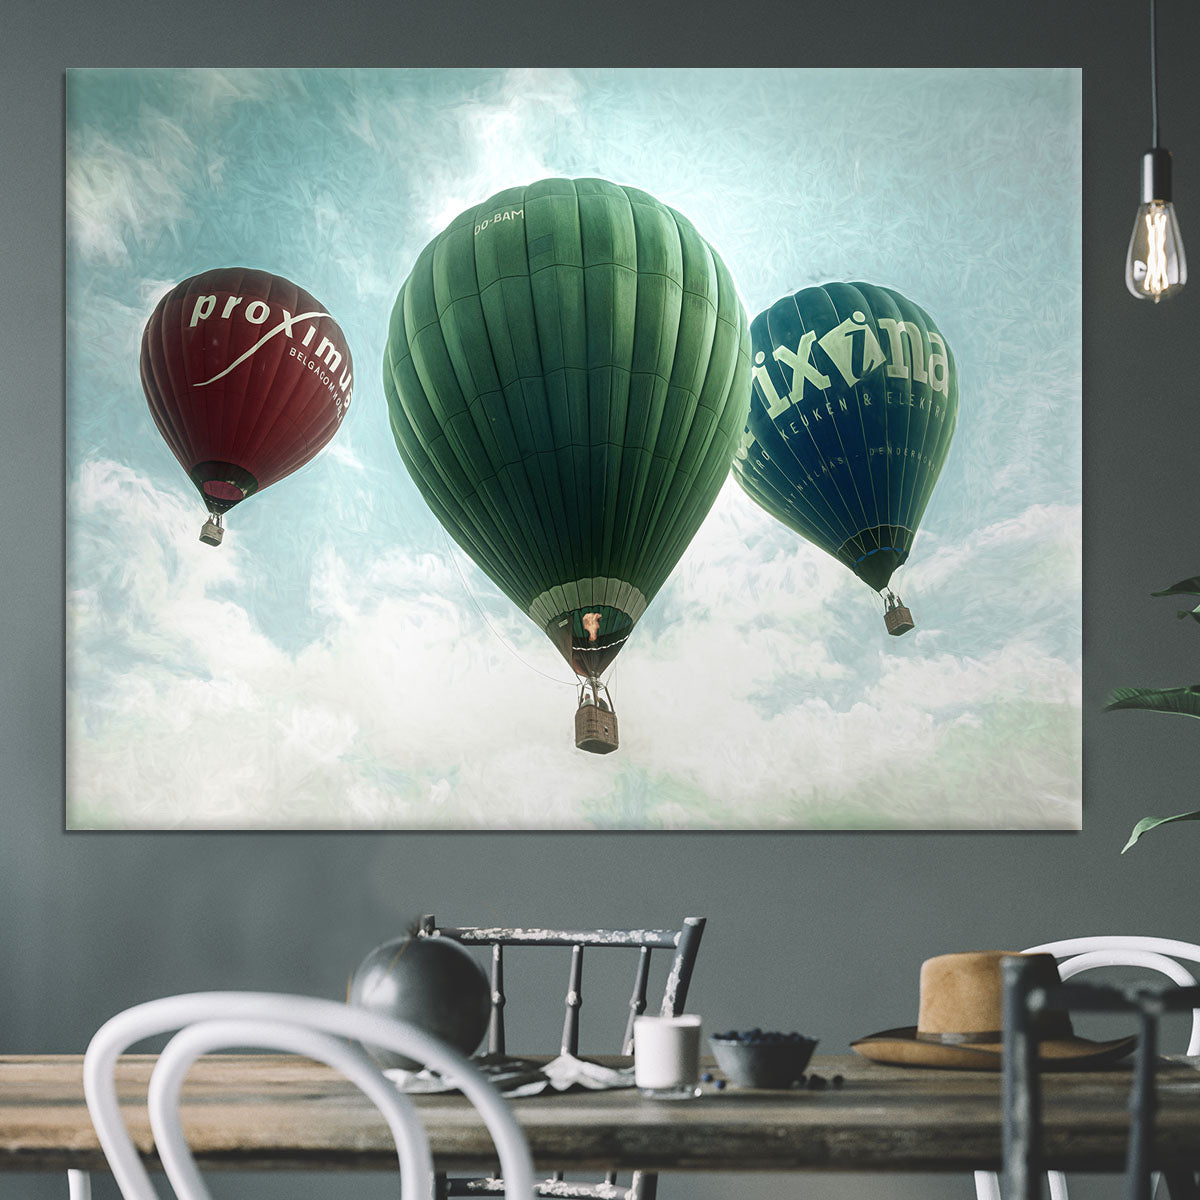 Full colour Canvas Print or Poster - 1x - 3